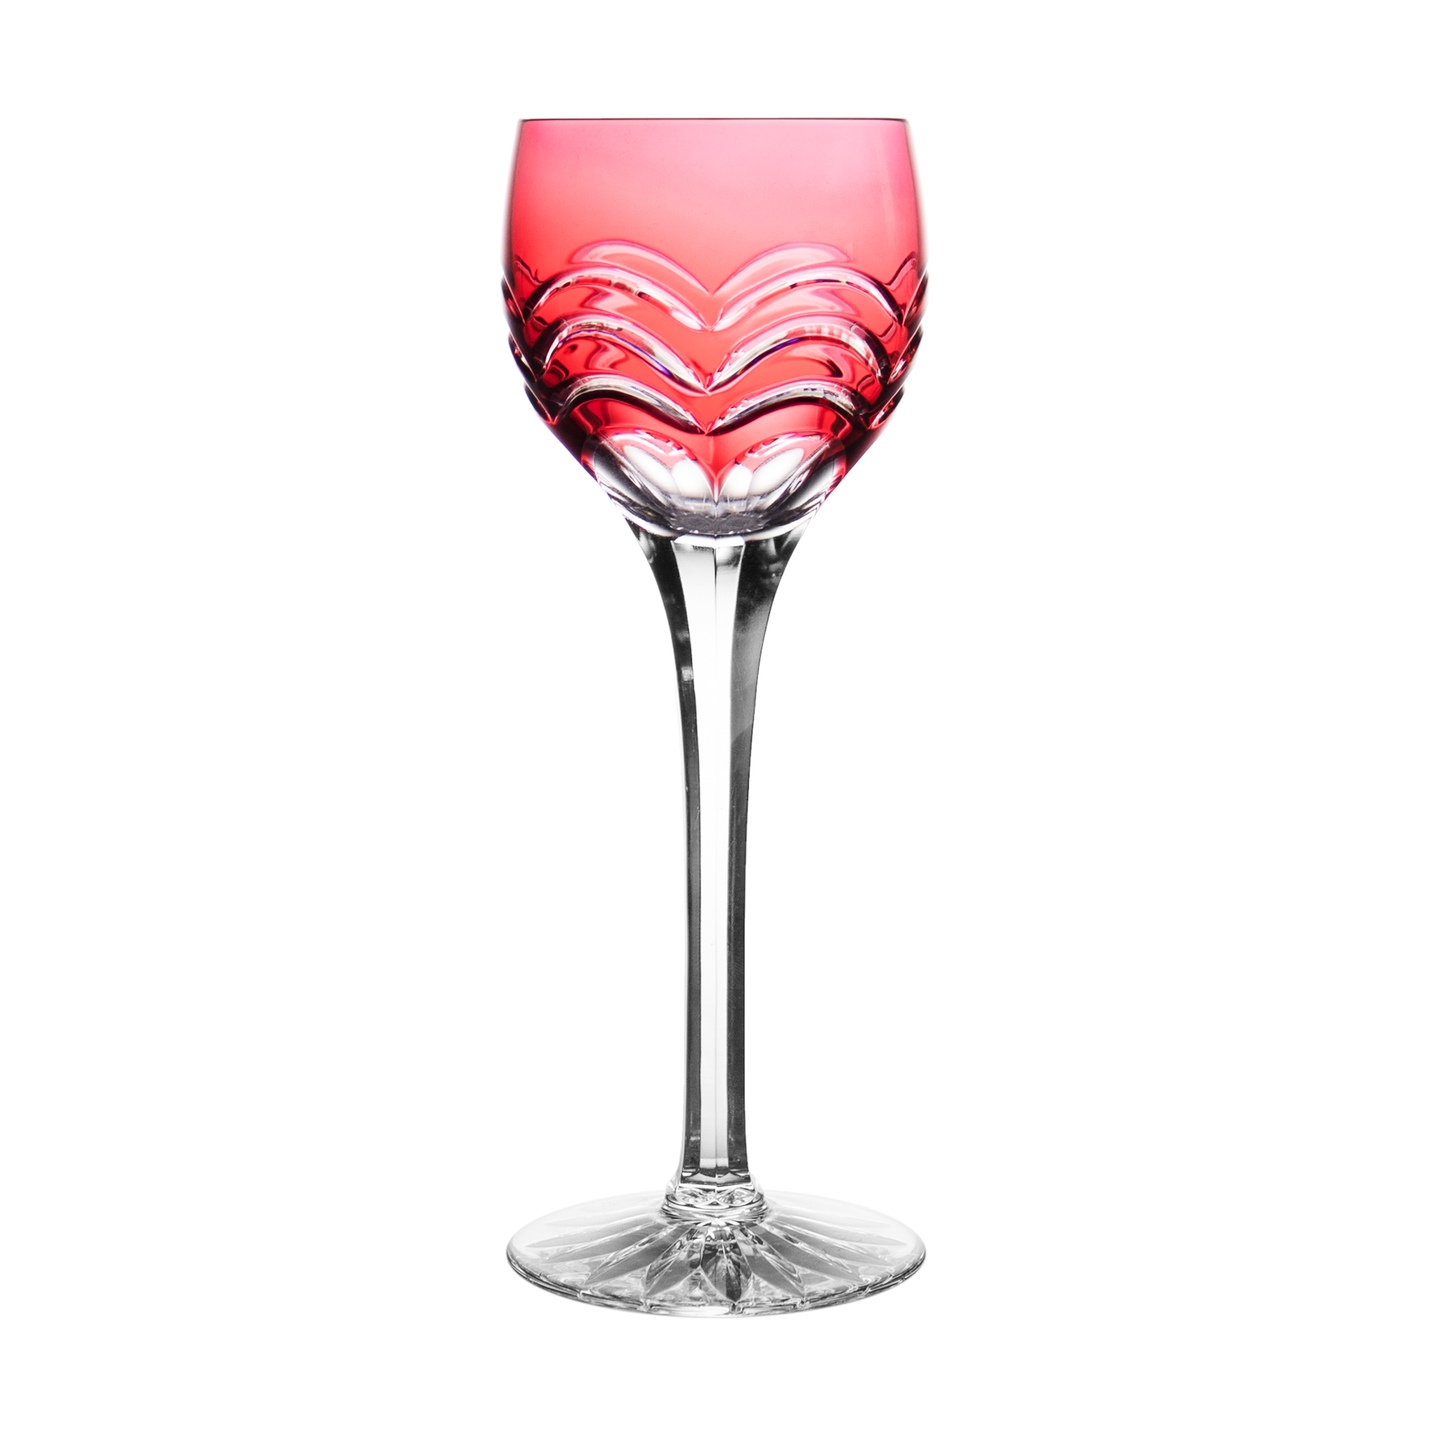 Leoma Golden Red Small Wine Glass